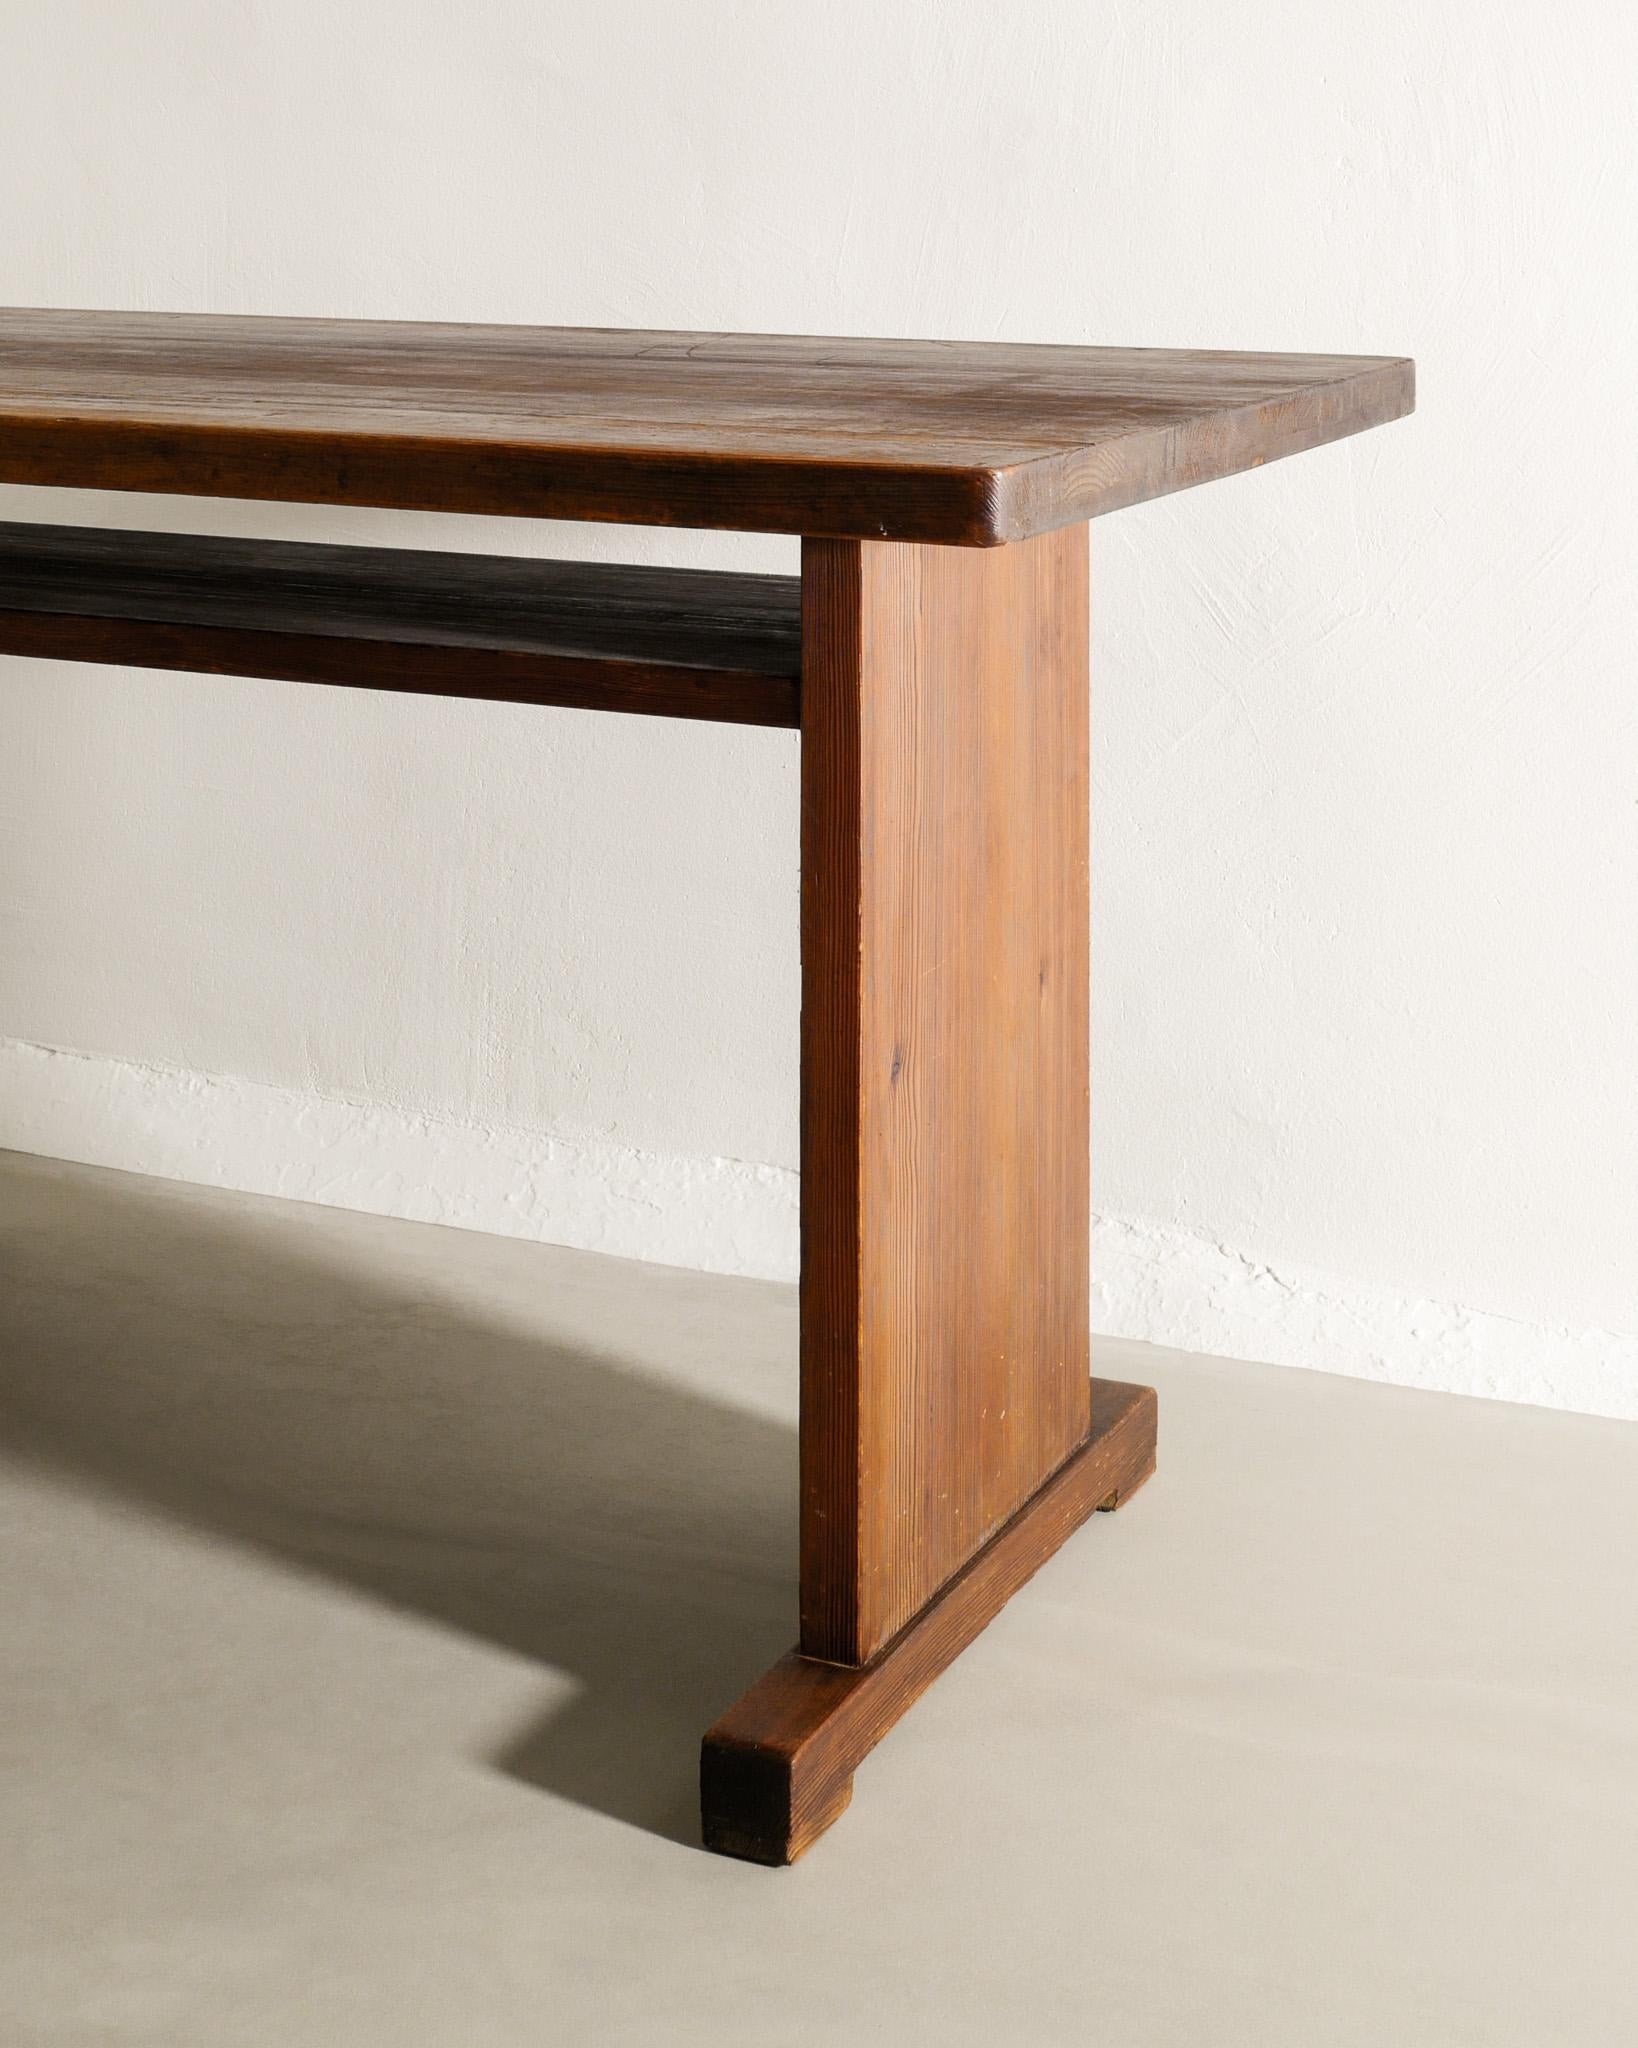 Swedish Pine Table / Desk in style of Axel Einar Hjorth Produced in Sweden 1930s In Good Condition For Sale In Stockholm, SE